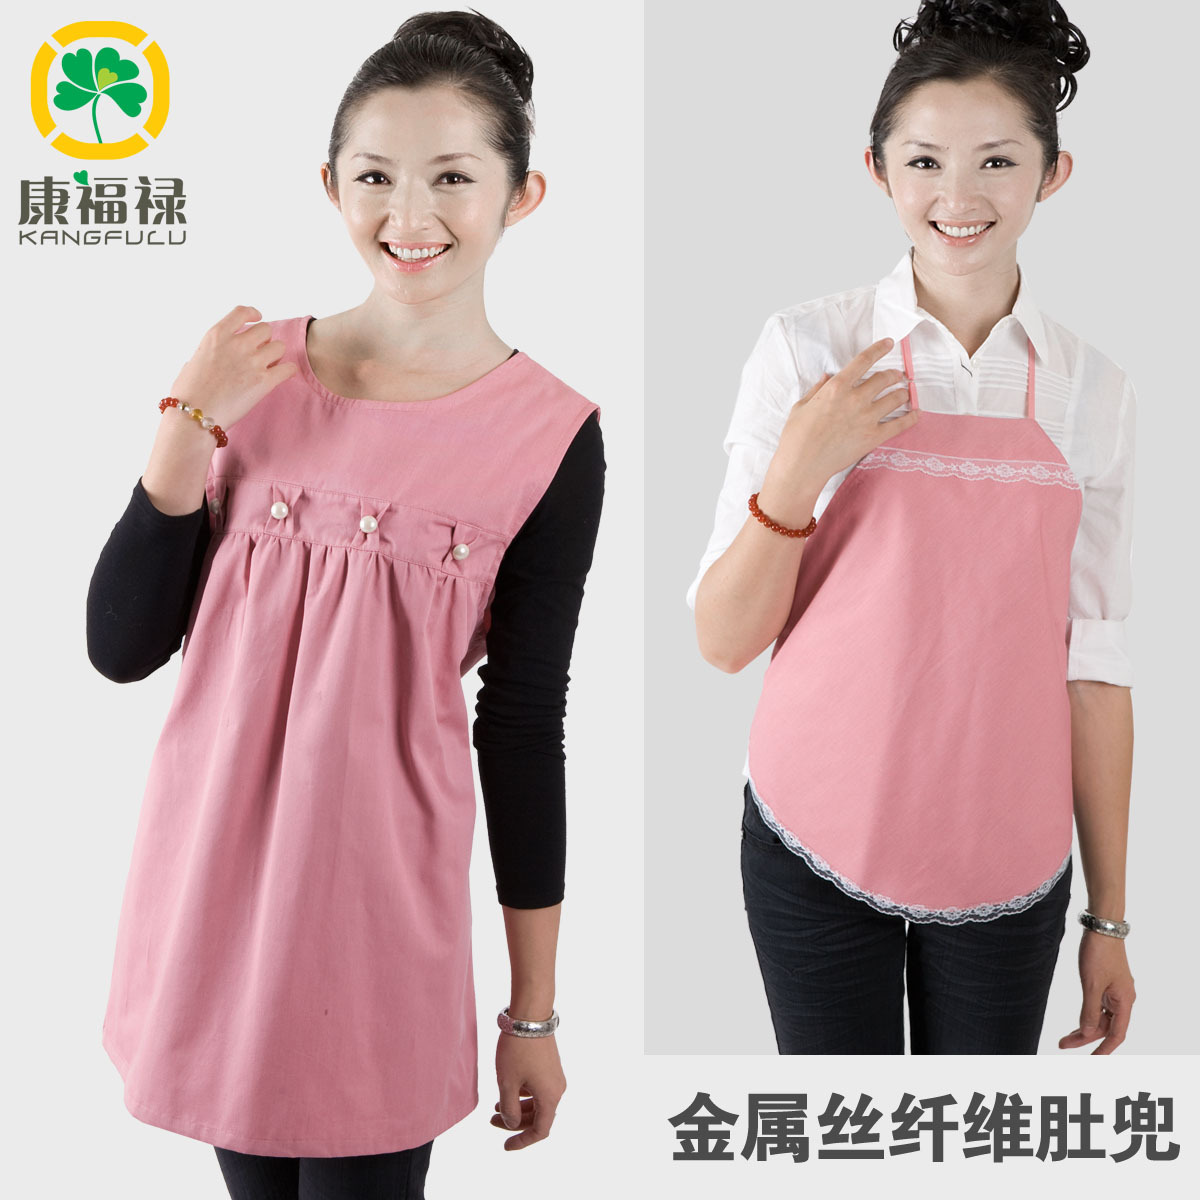 Radiation-resistant maternity clothes radiation-resistant maternity clothing 603 radiation-resistant bellyached